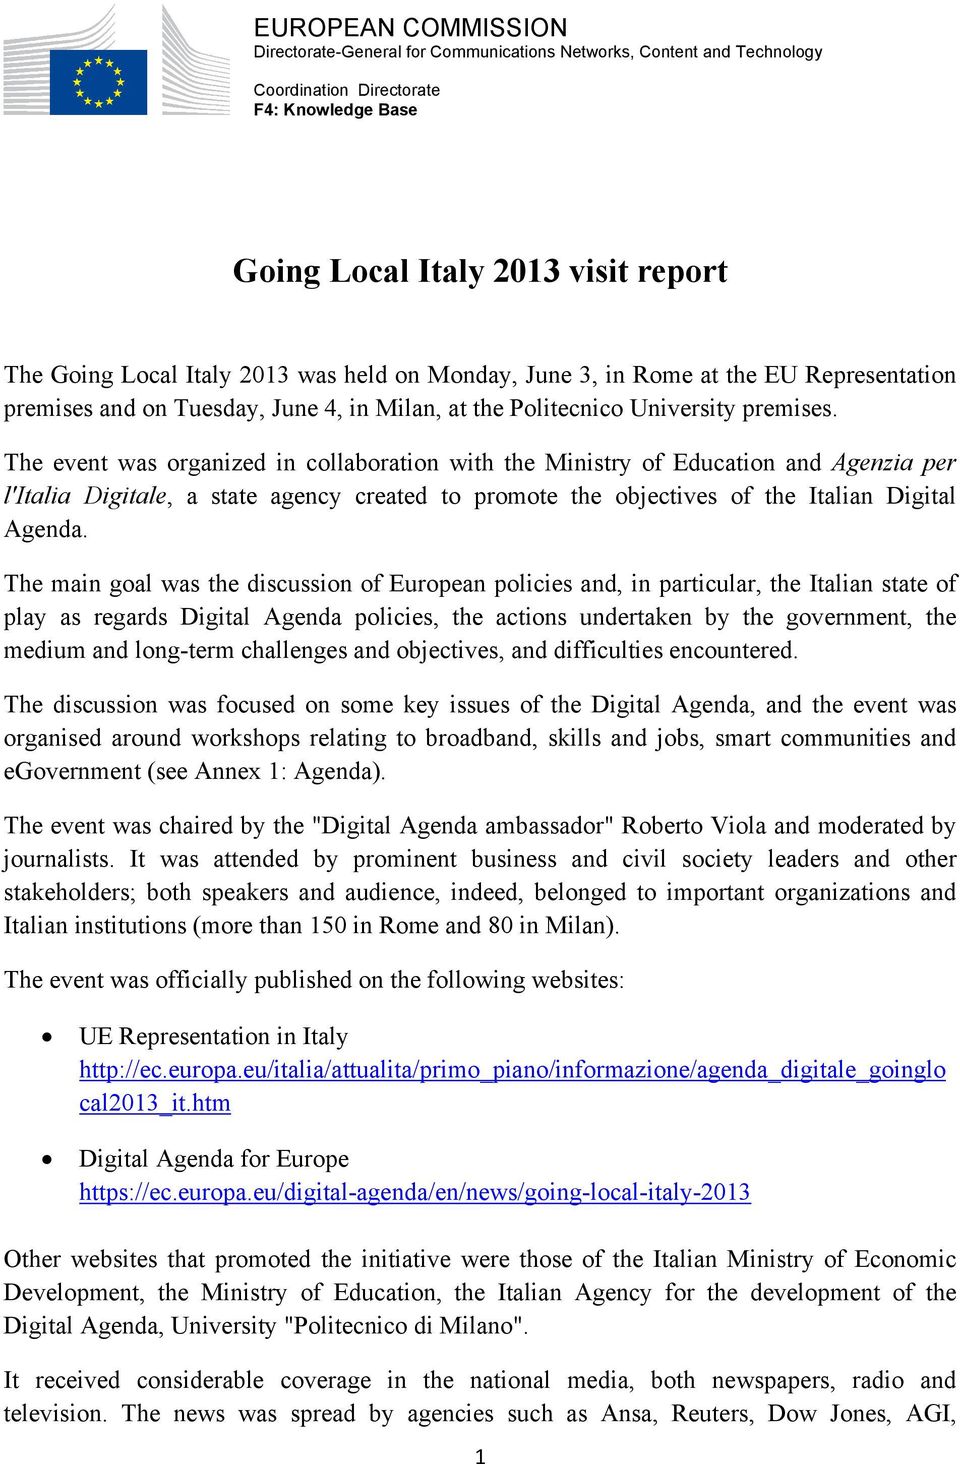 The event was organized in collaboration with the Ministry of Education and Agenzia per l'italia Digitale, a state agency created to promote the objectives of the Italian Digital Agenda.